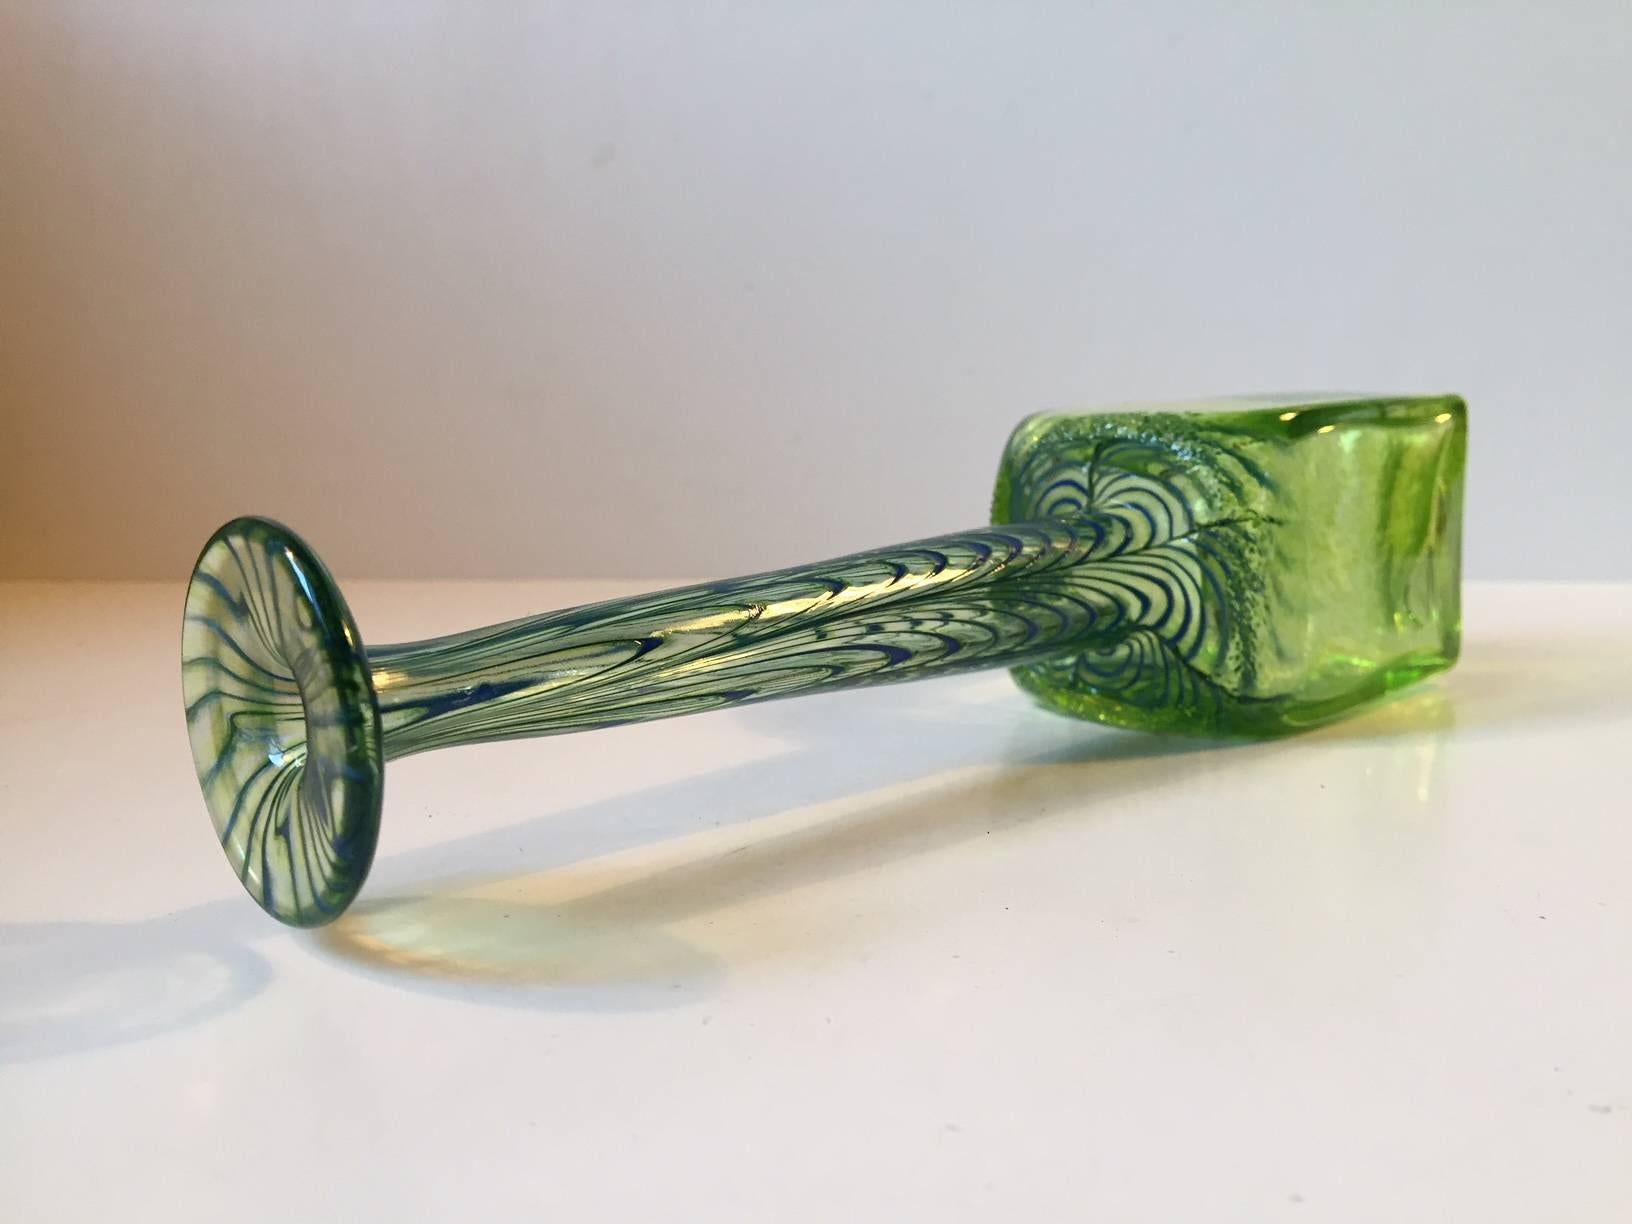 Long-necked green infusion glass vase with blue spirals. Signed and numbered unclear to the base - by unidentified artist/glassmaker. This piece is created in Scandinavia in a style reminiscent of Anthony Schafermeyer and Claire Kelly.